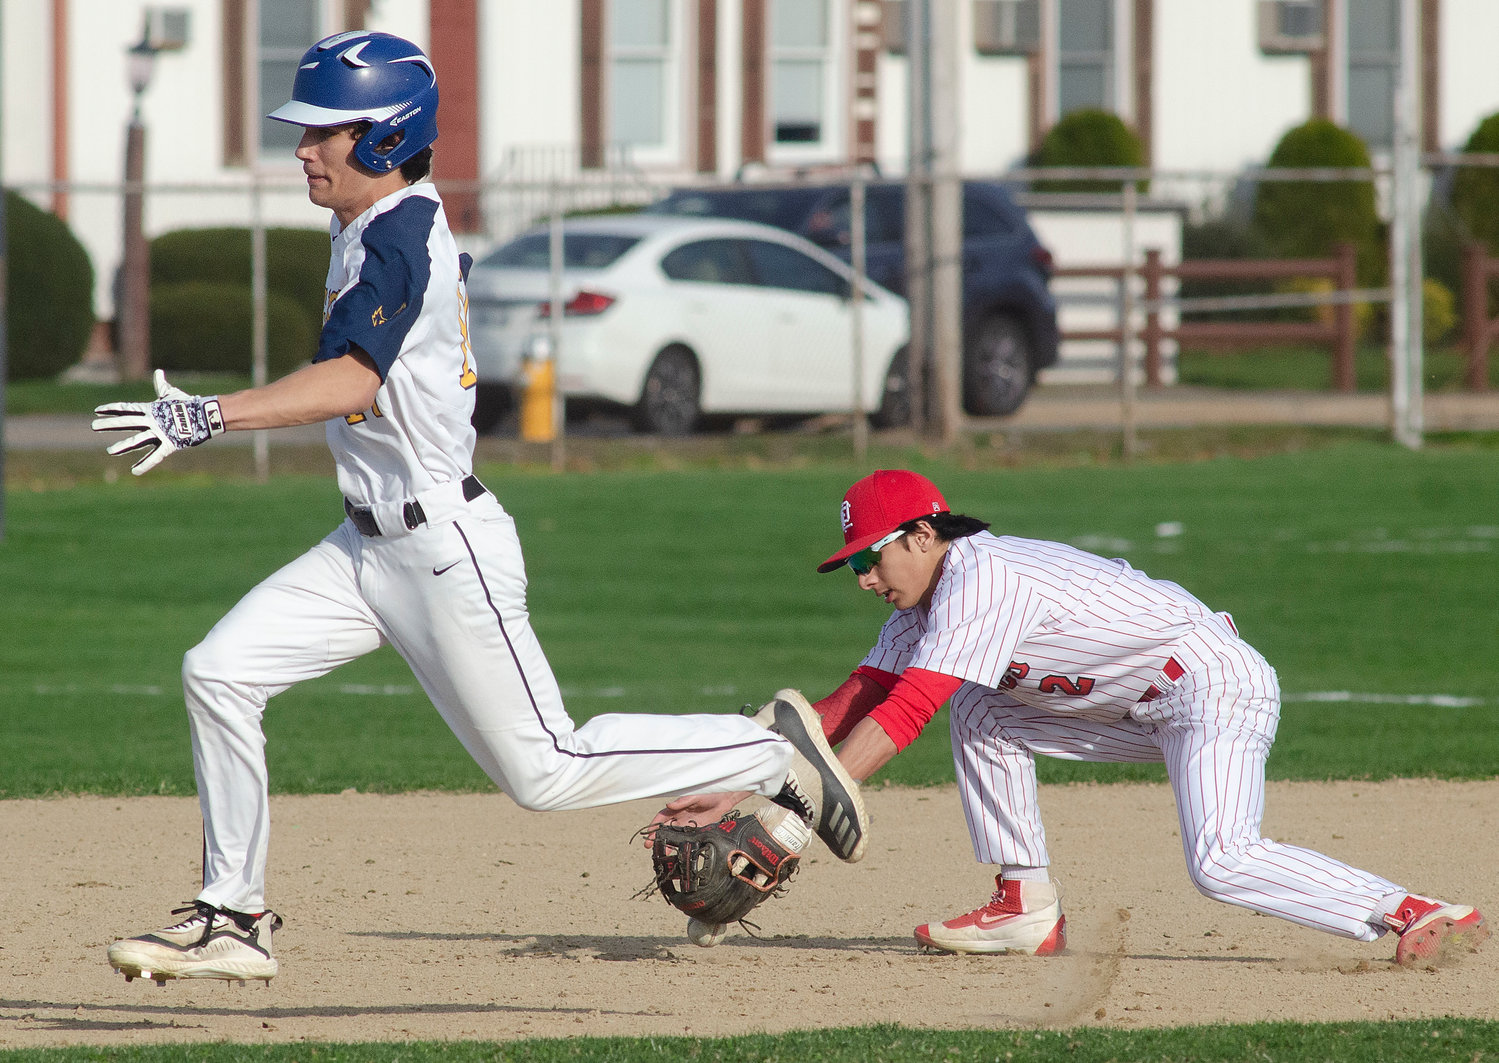 Barrington High School’s JC Neimeyer sprints past an East Providence infielder during the Eagles’ game on April 13.